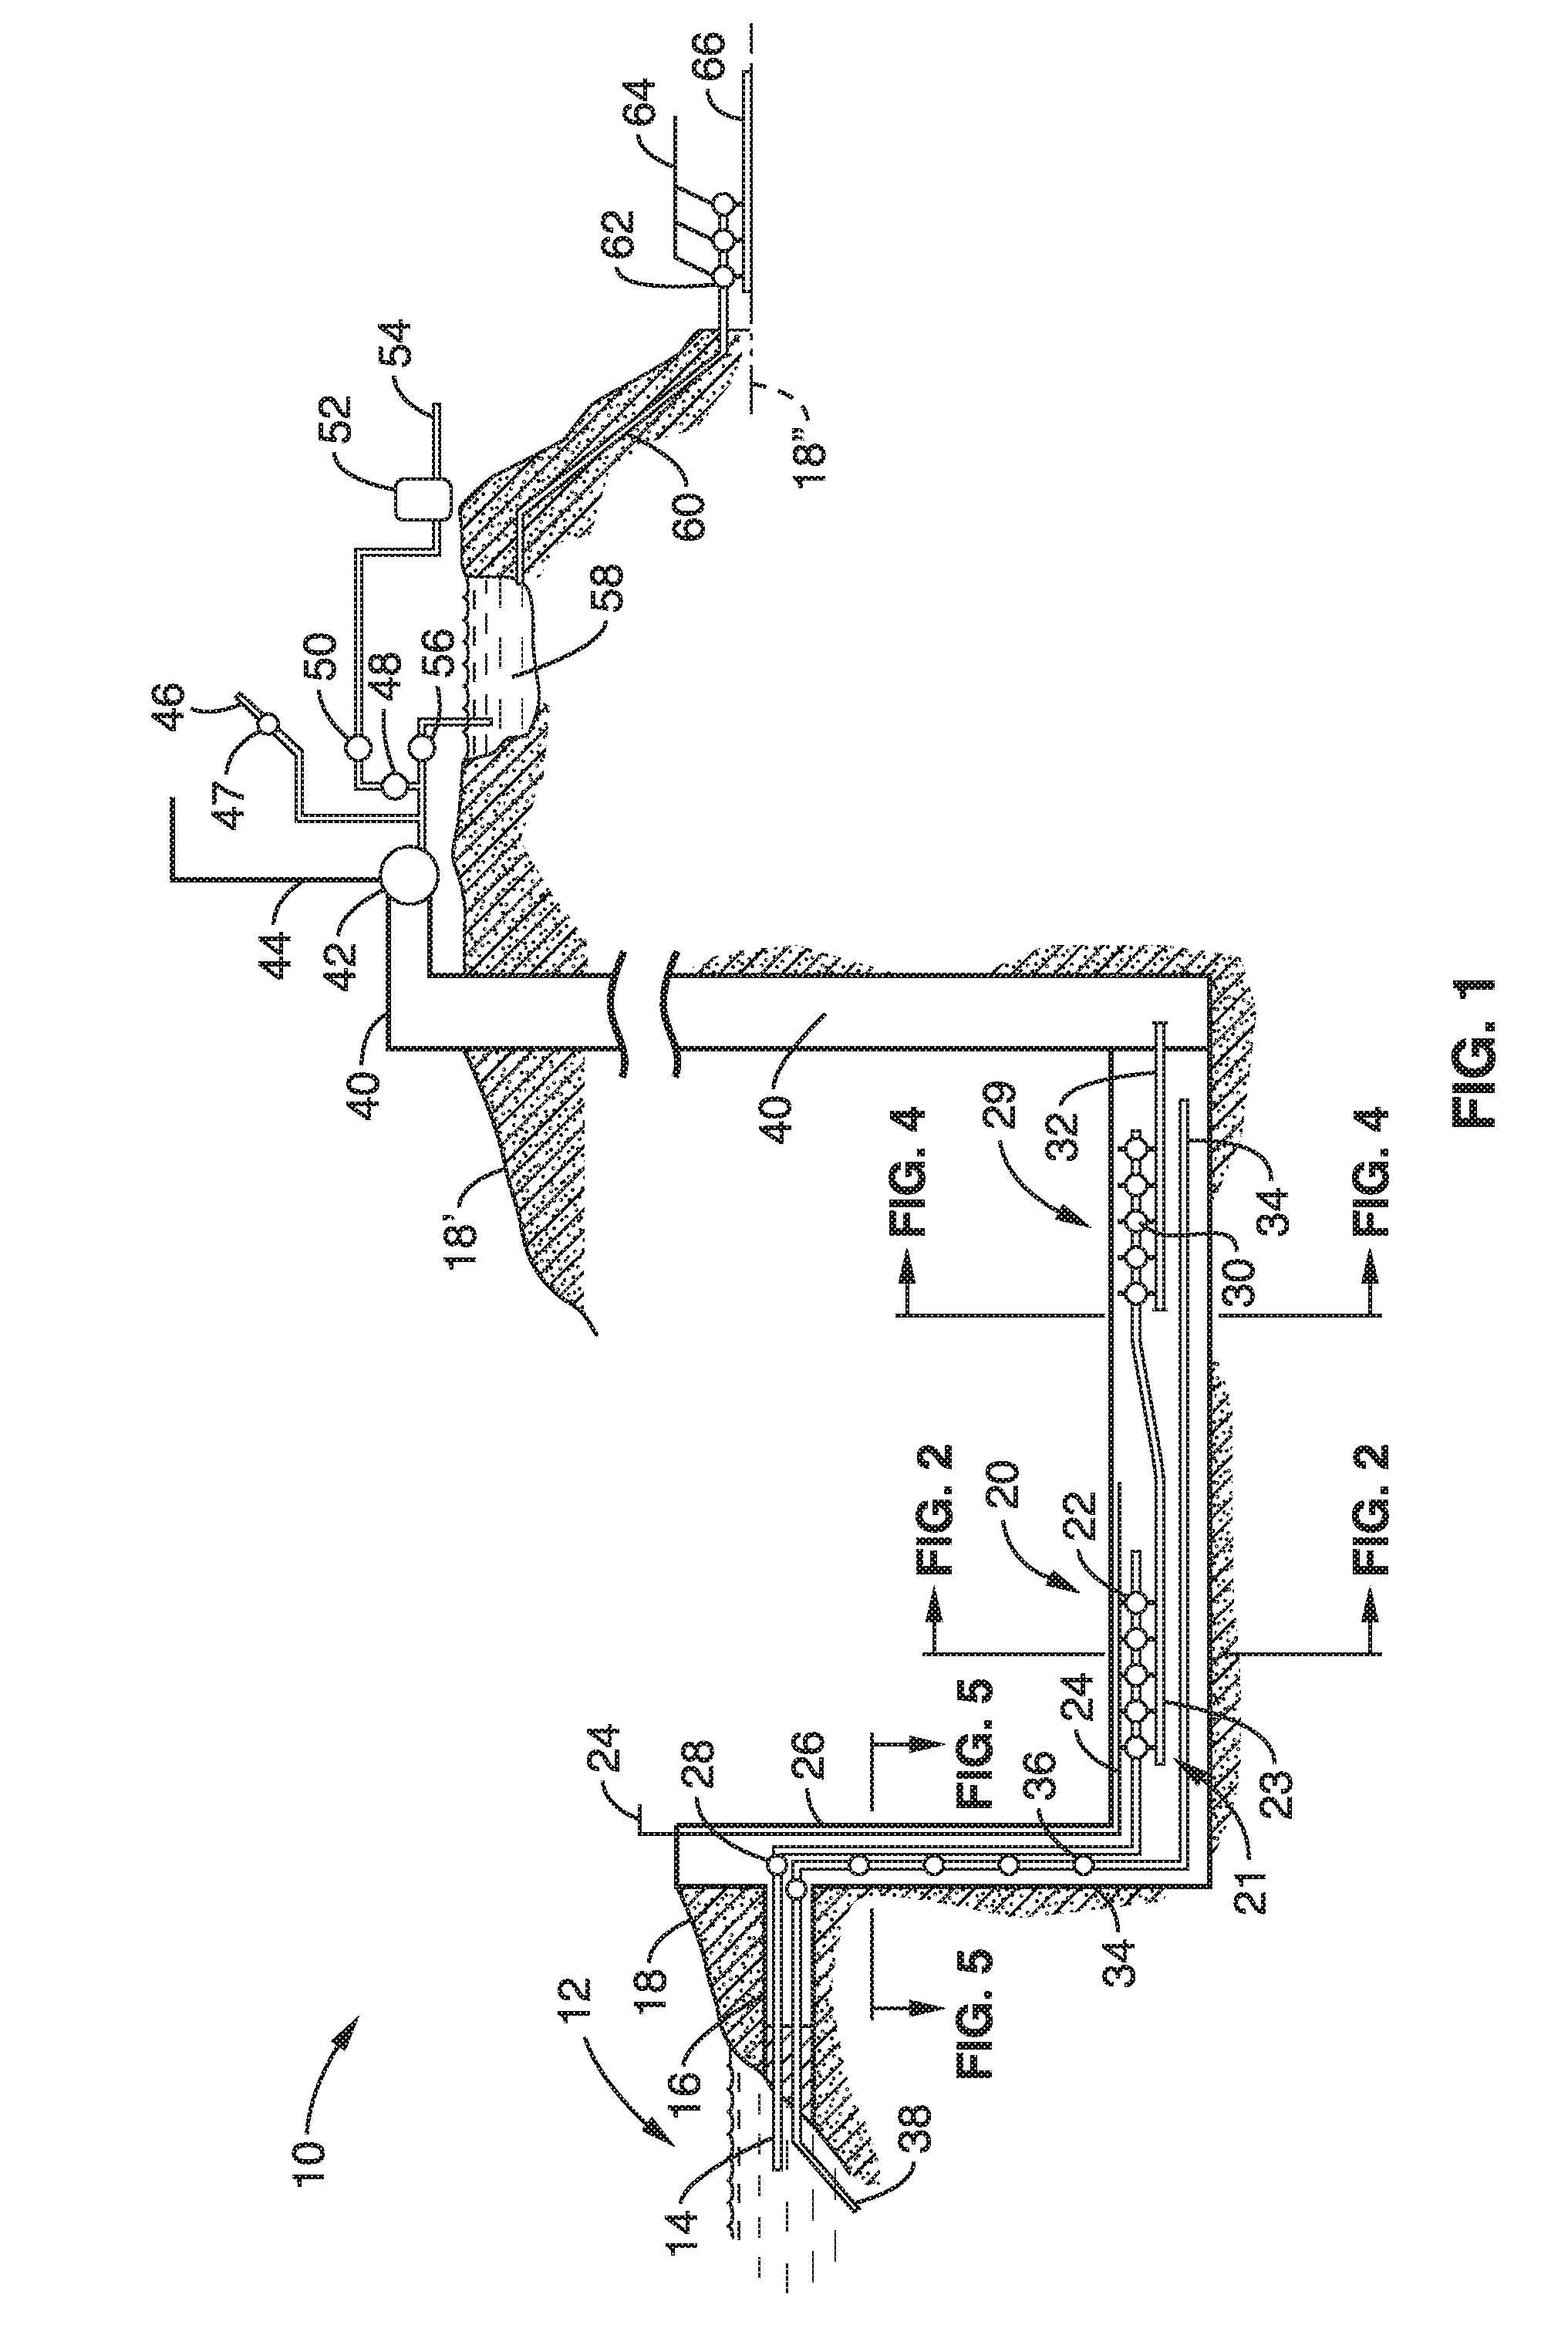 Electricity generation and water desalinization in constructed shafts utilizing geothermal heat